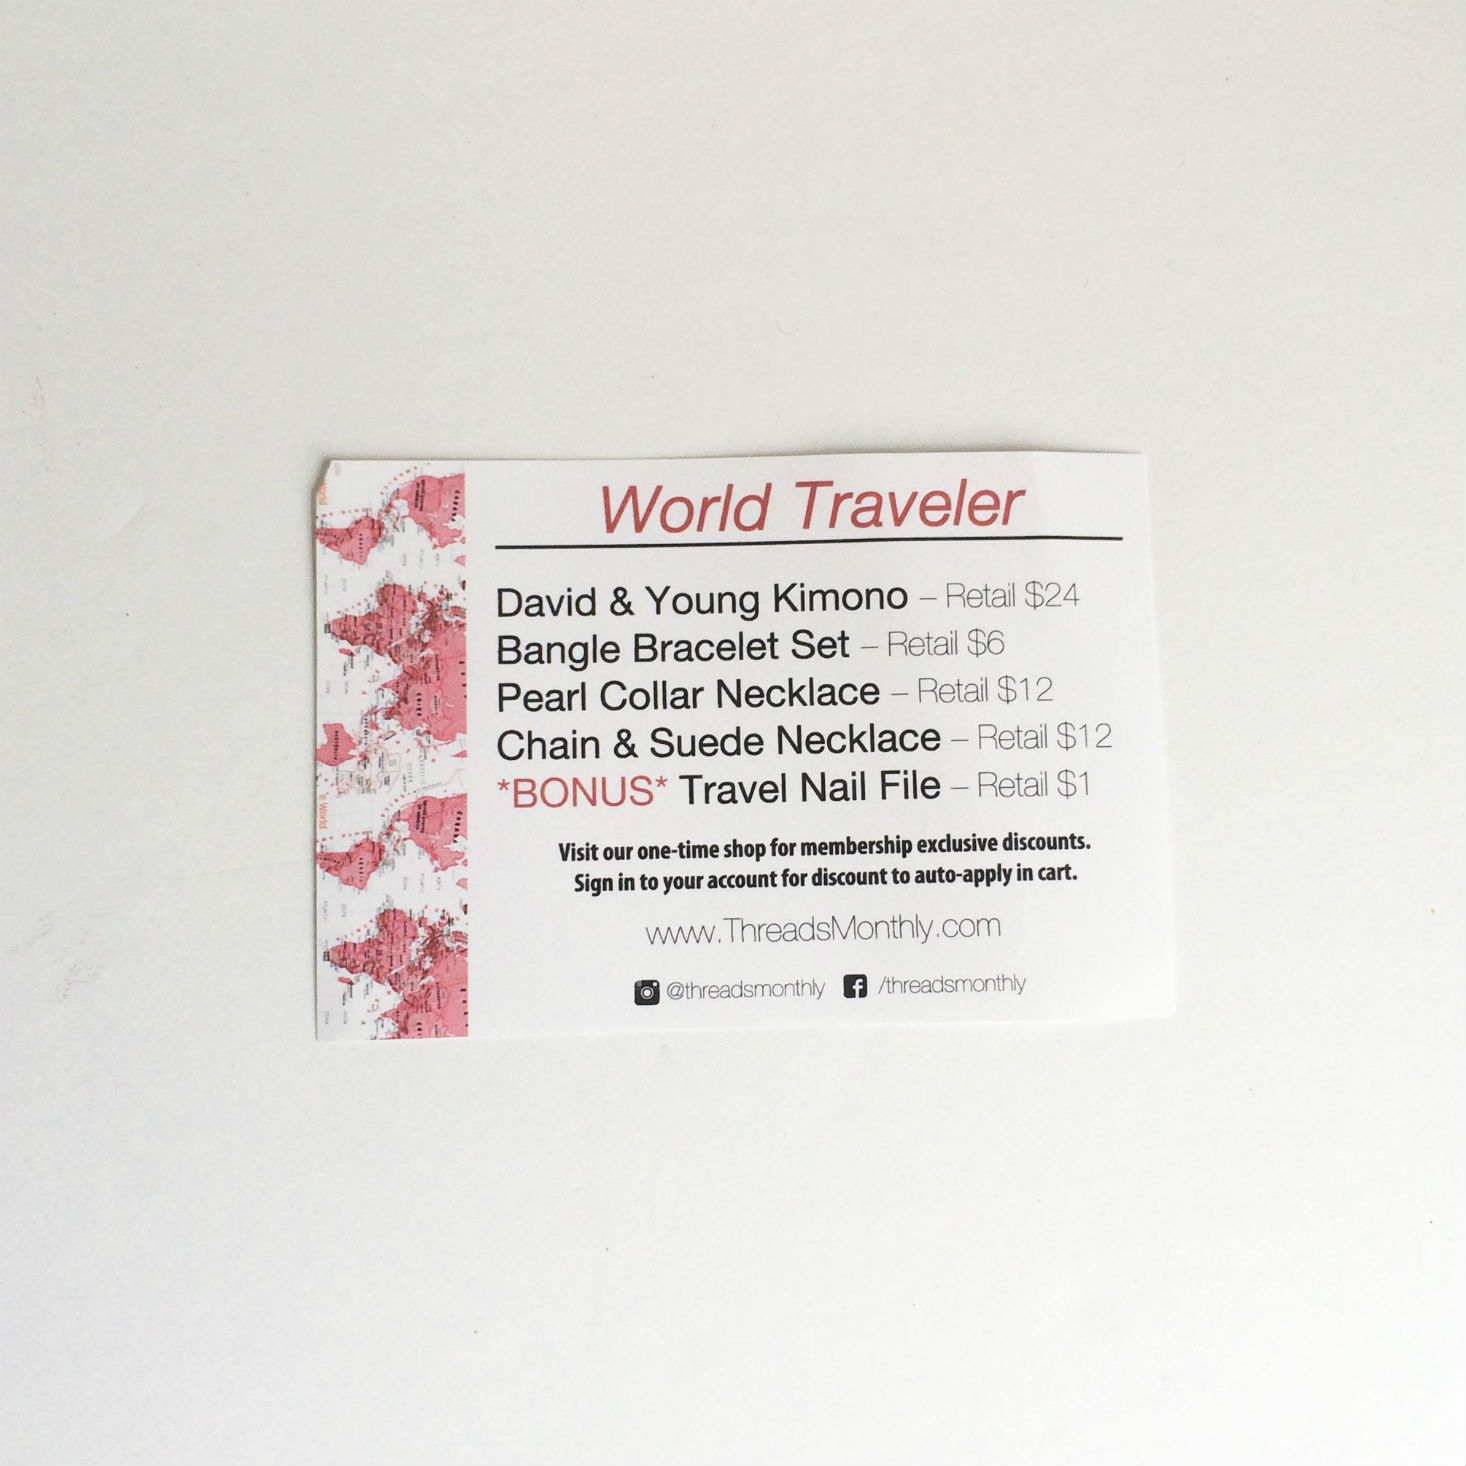 Read our review of the Threads Monthly World Traveler box!